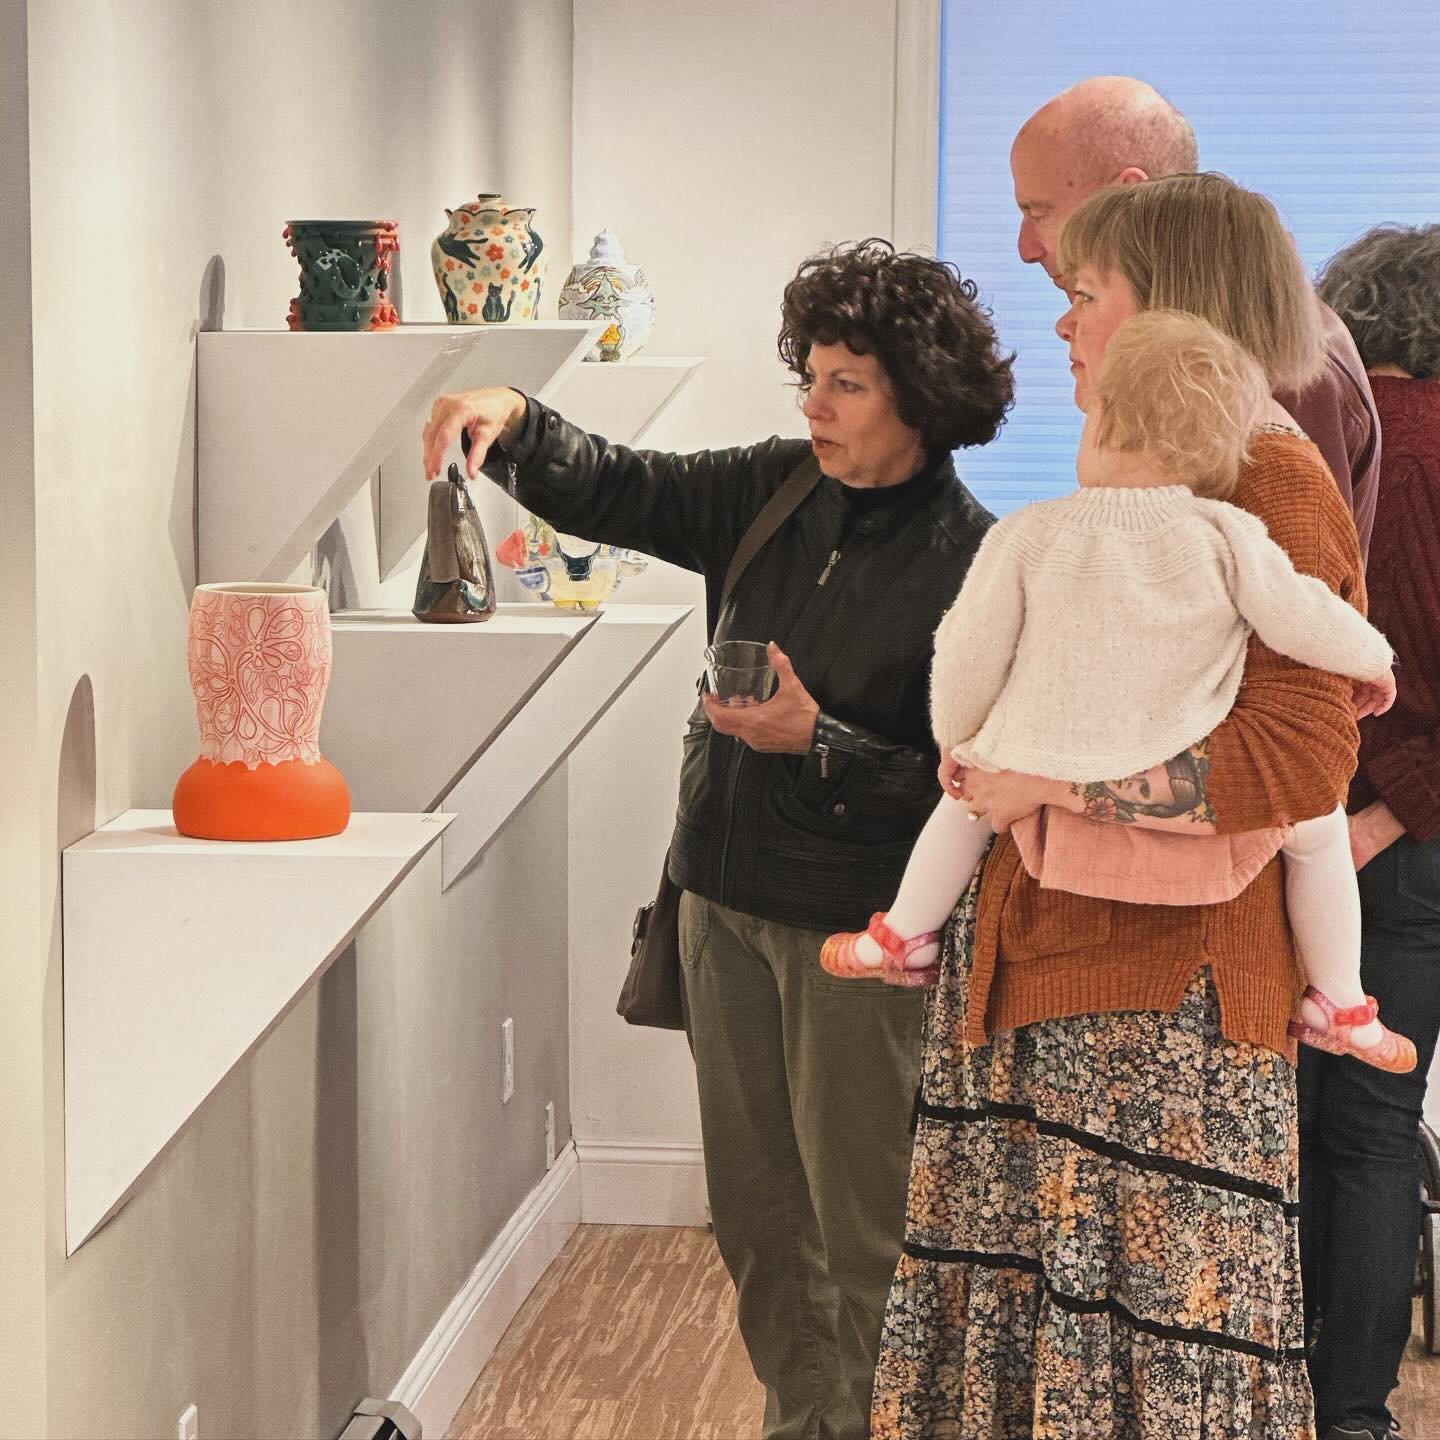 There&rsquo;s only a couple weeks left to see ColorPop! 💥 (juried by @didemmert_pottery ) if you&rsquo;re in need of a break from the gloomy weather, this exhibition is sure to bring some color to your spring 😉. Gallery hours are M-Sat. 10-5. Don&r